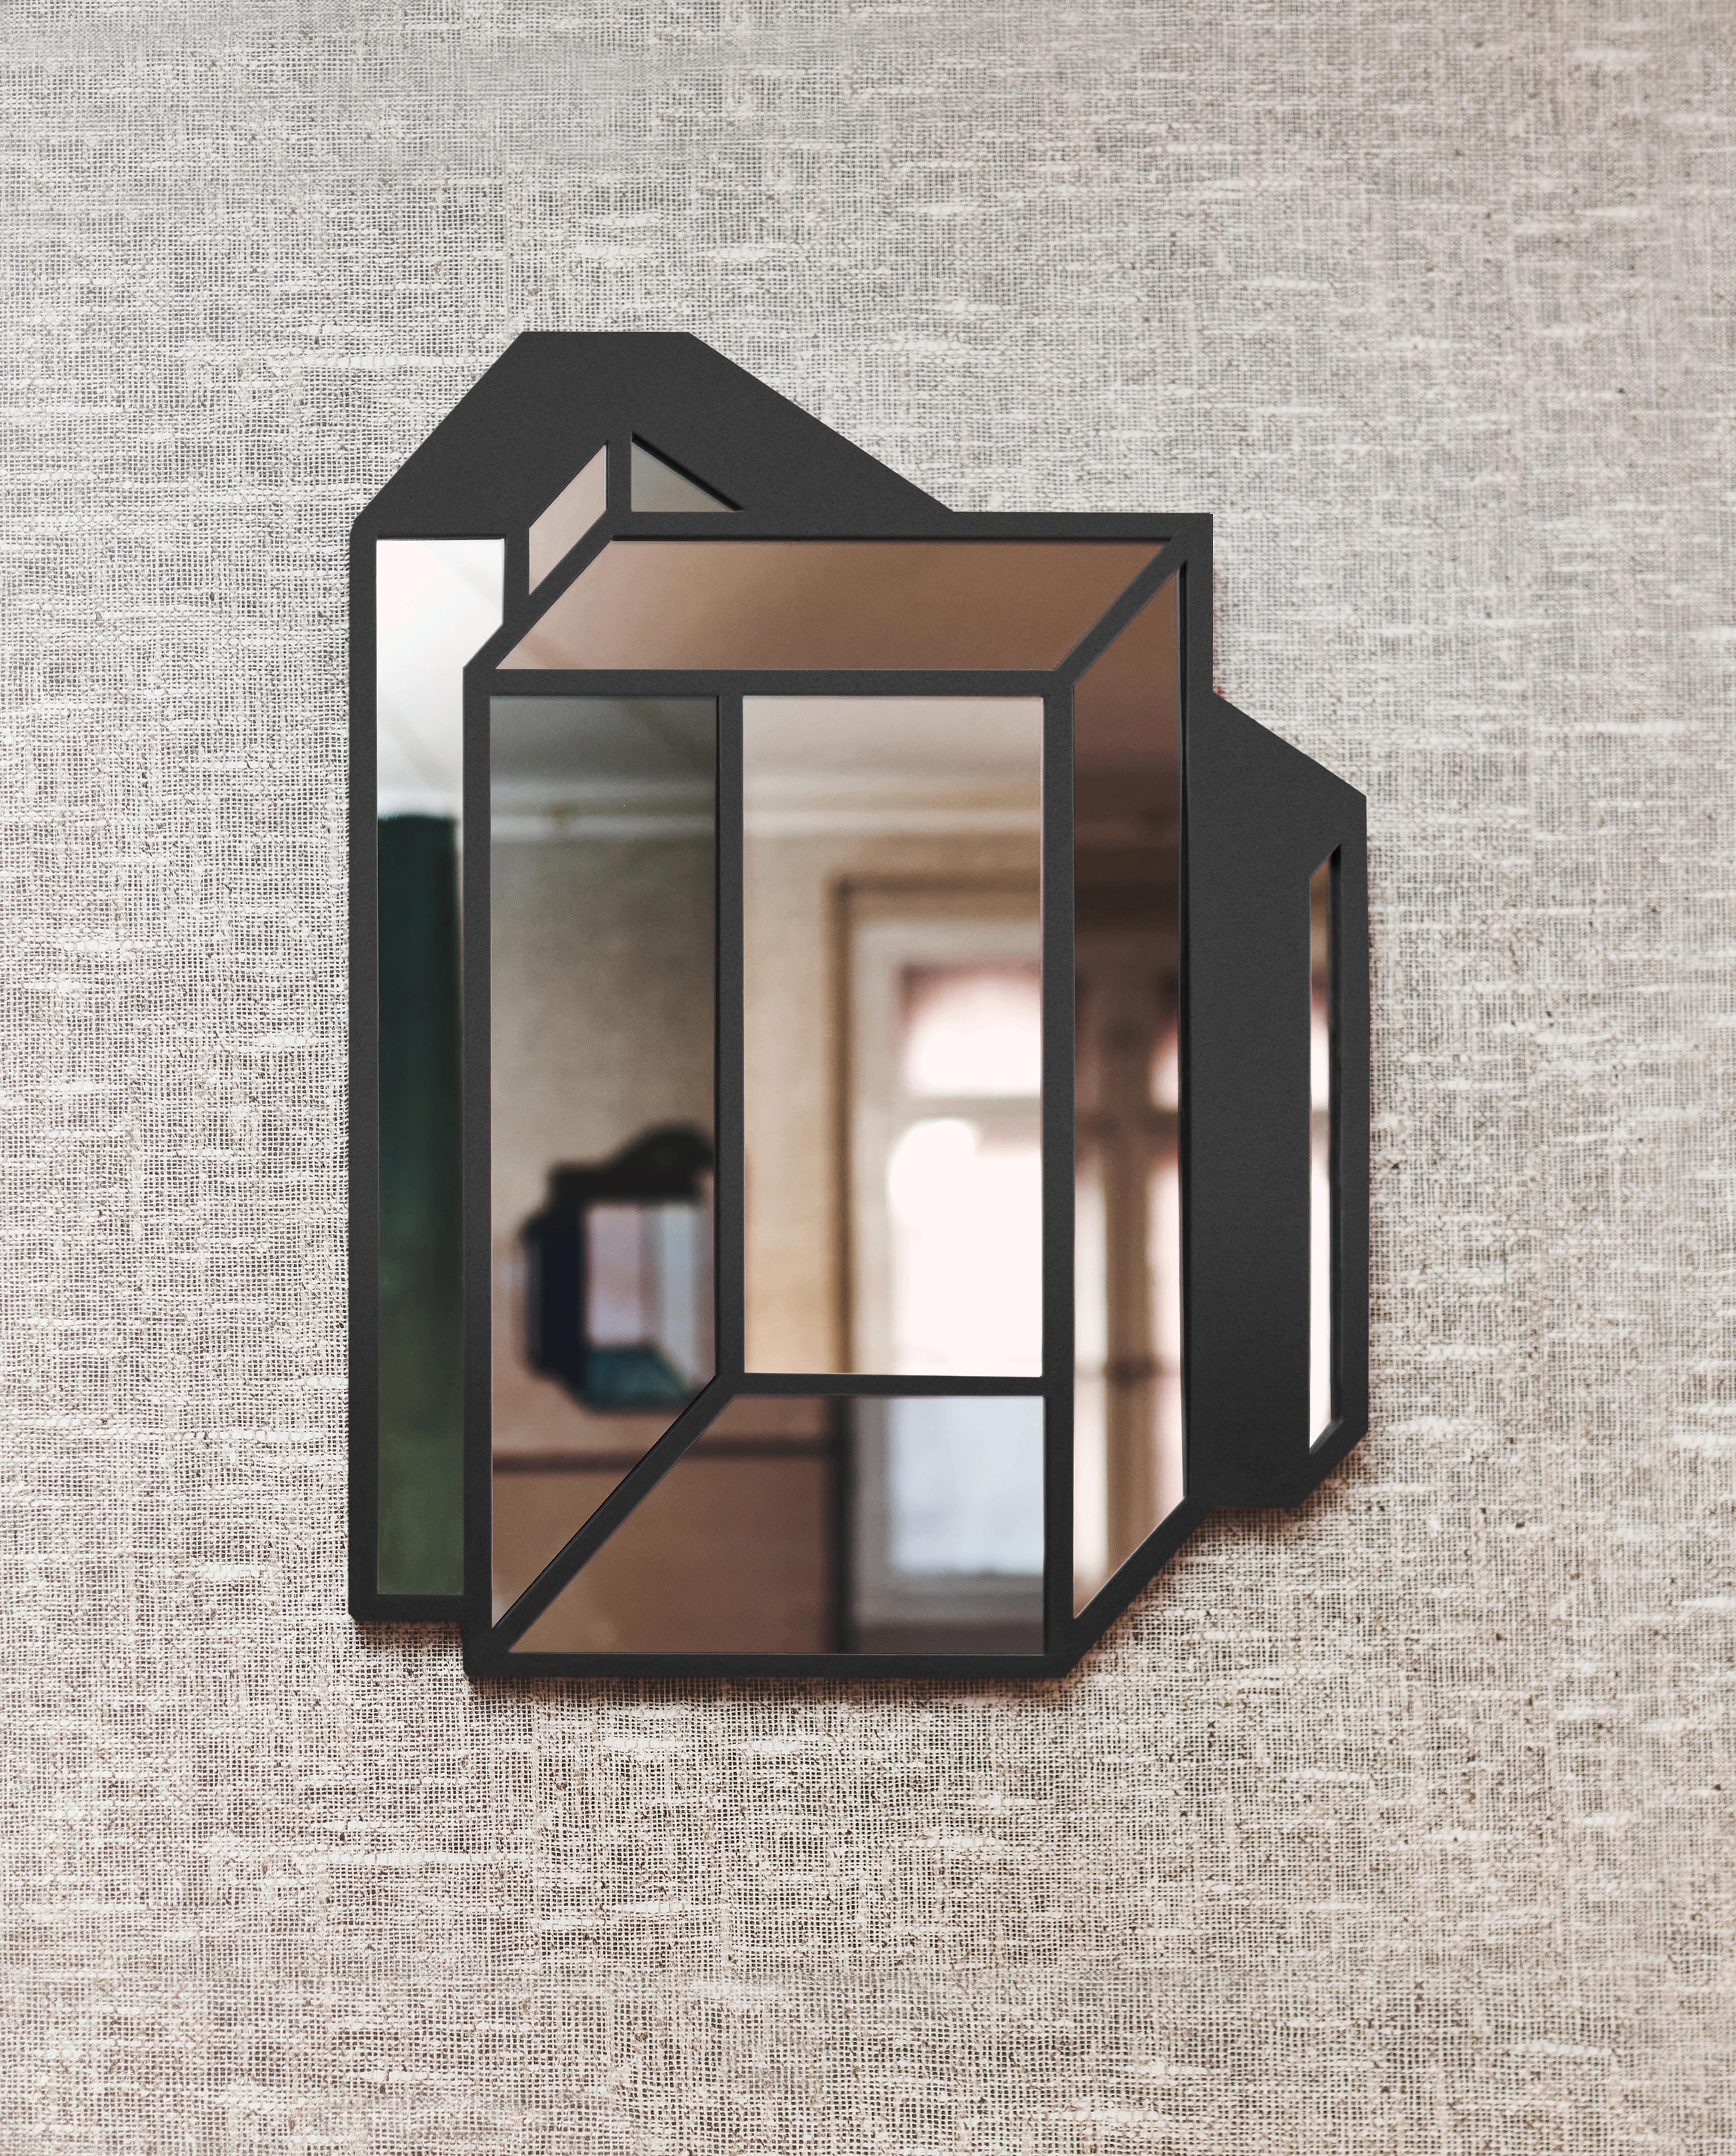 Mirror object No.2 by Dechem Studio.
Dimensions: D 53 x H 70 cm.
Materials: glass, metal.

Axonometric wall mounted mirrors as a symbol of transience and ephemerality translates the three-dimensional relations into a flat surface. Through the